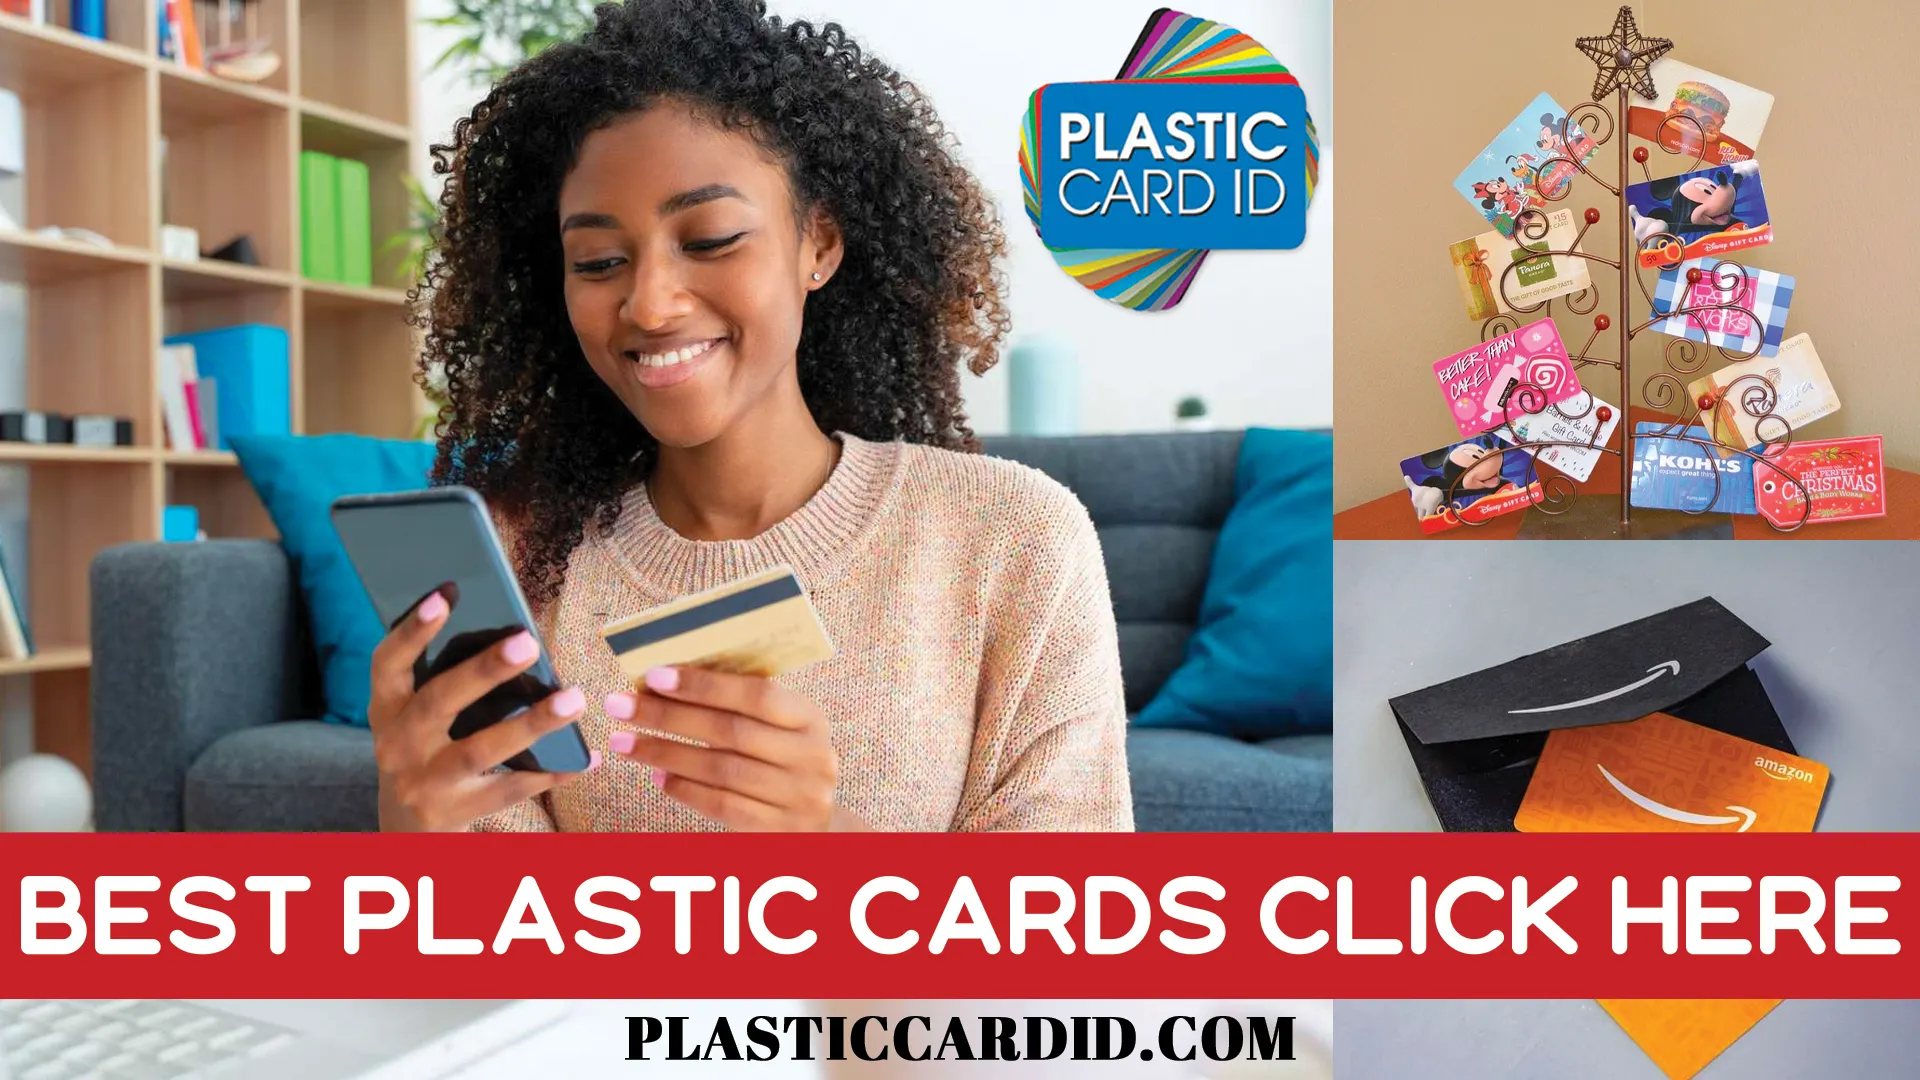 Why Trust Your Card Security to Plastic Card ID




?